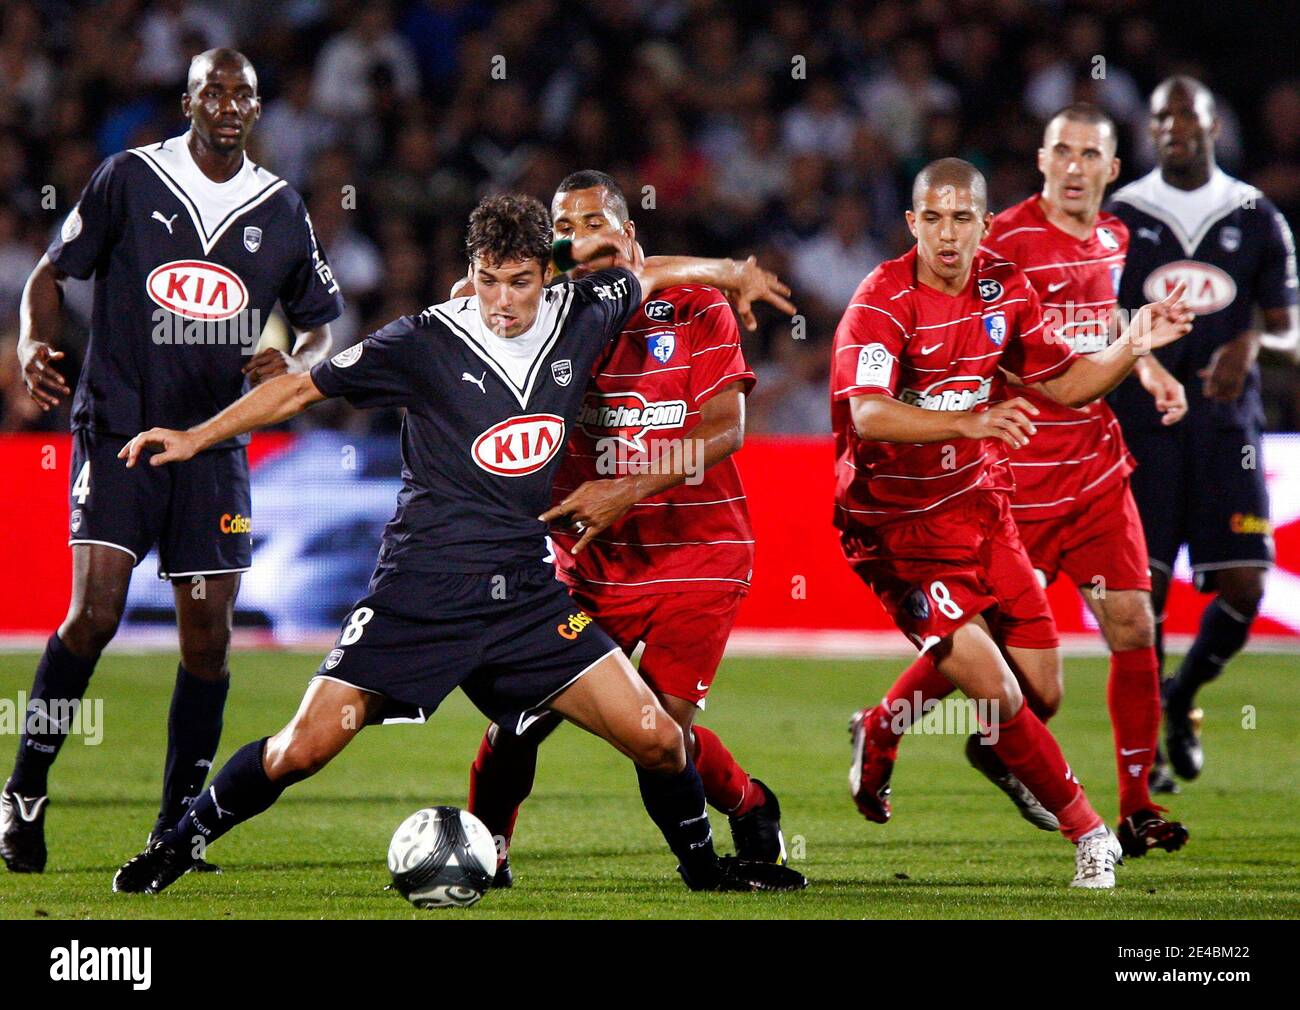 Bordeaux's Yoann Gourcuff during the French First League Soccer match,  Girondins de Bordeaux vs Grenoble Foot 38 at Chaban Delmas stadium in  Bordeaux, France on September 12, 2009. Bordeaux won 1-0. Photo